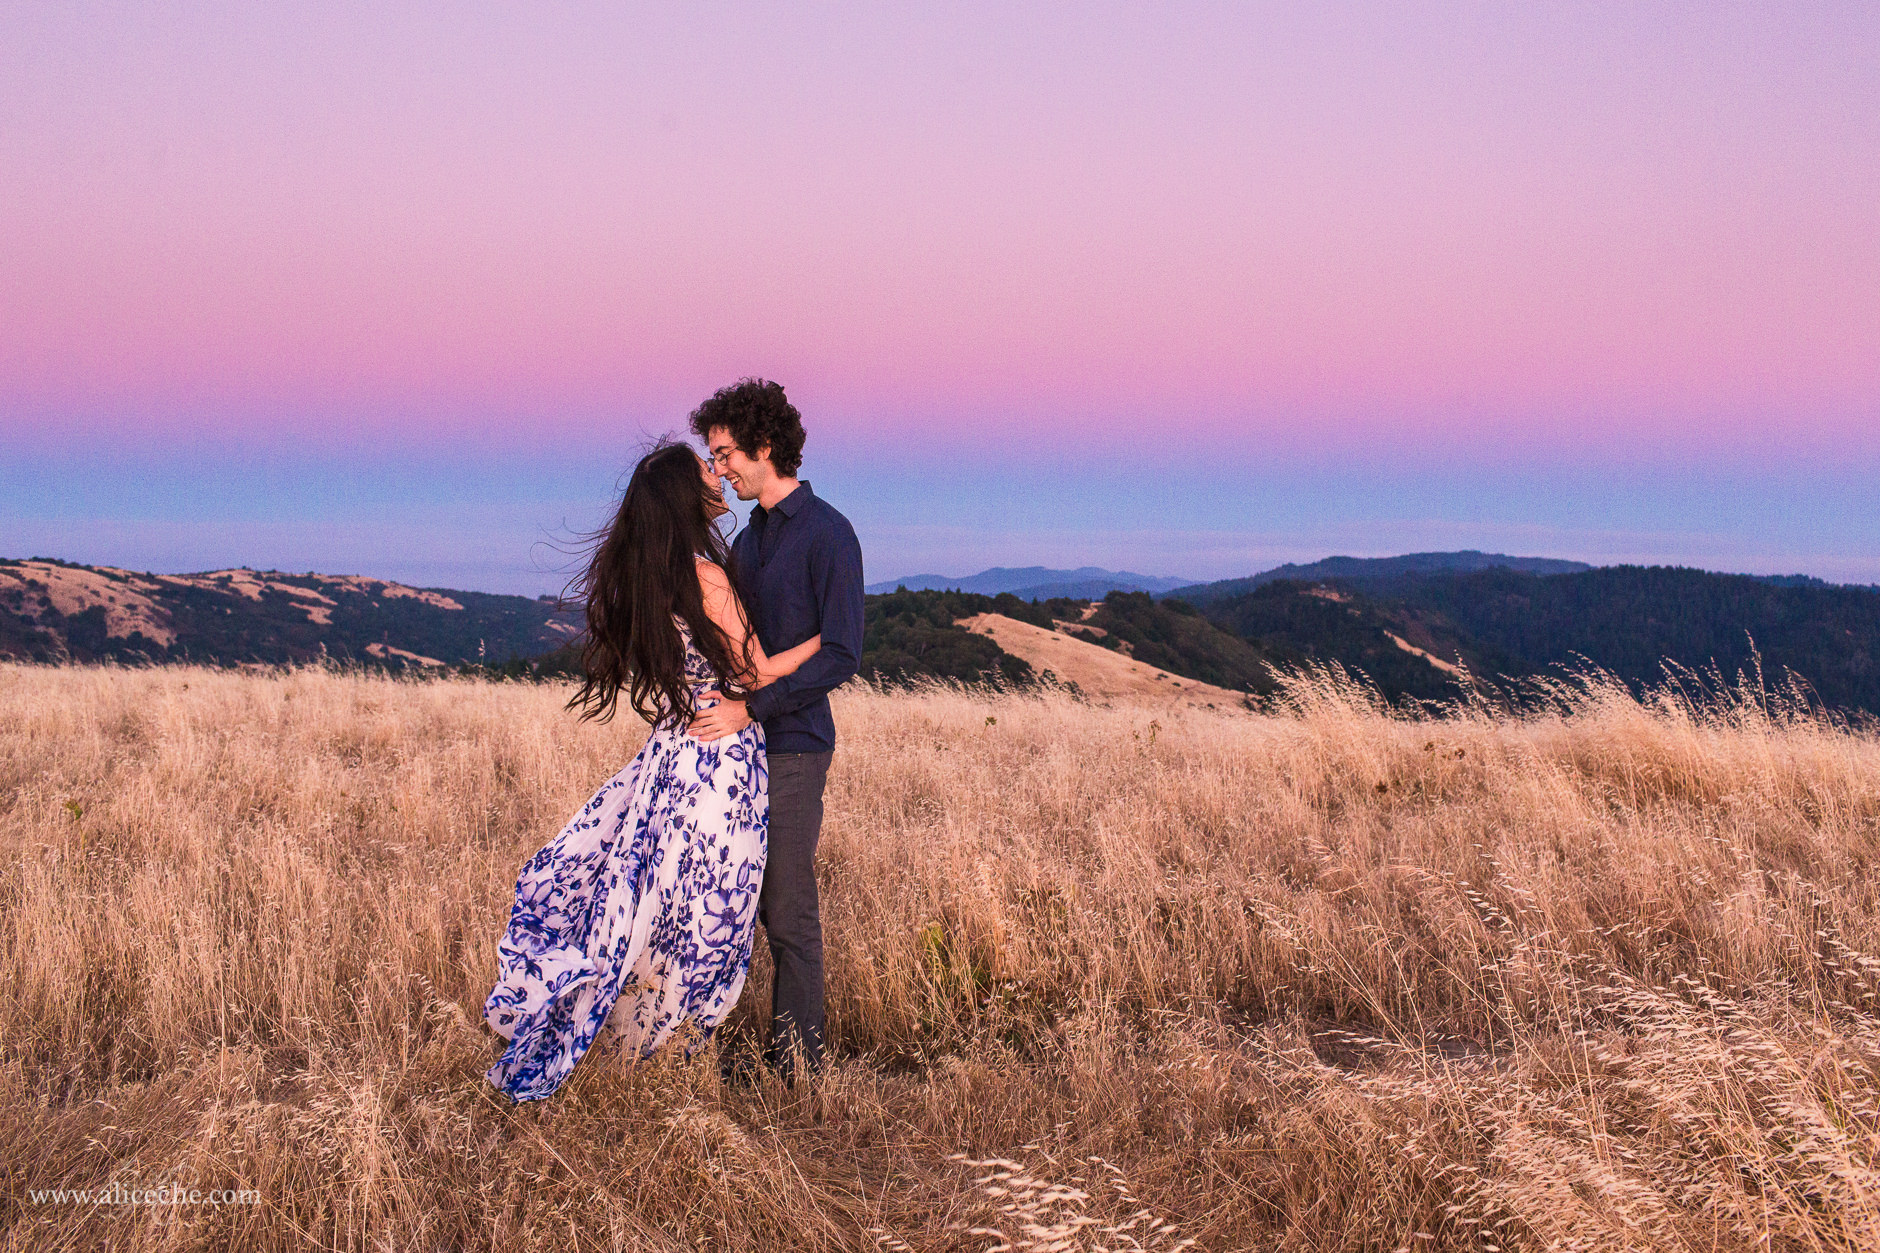 Russian Ridge Couples Session Couple at Dusk Windswept Hair and Dress